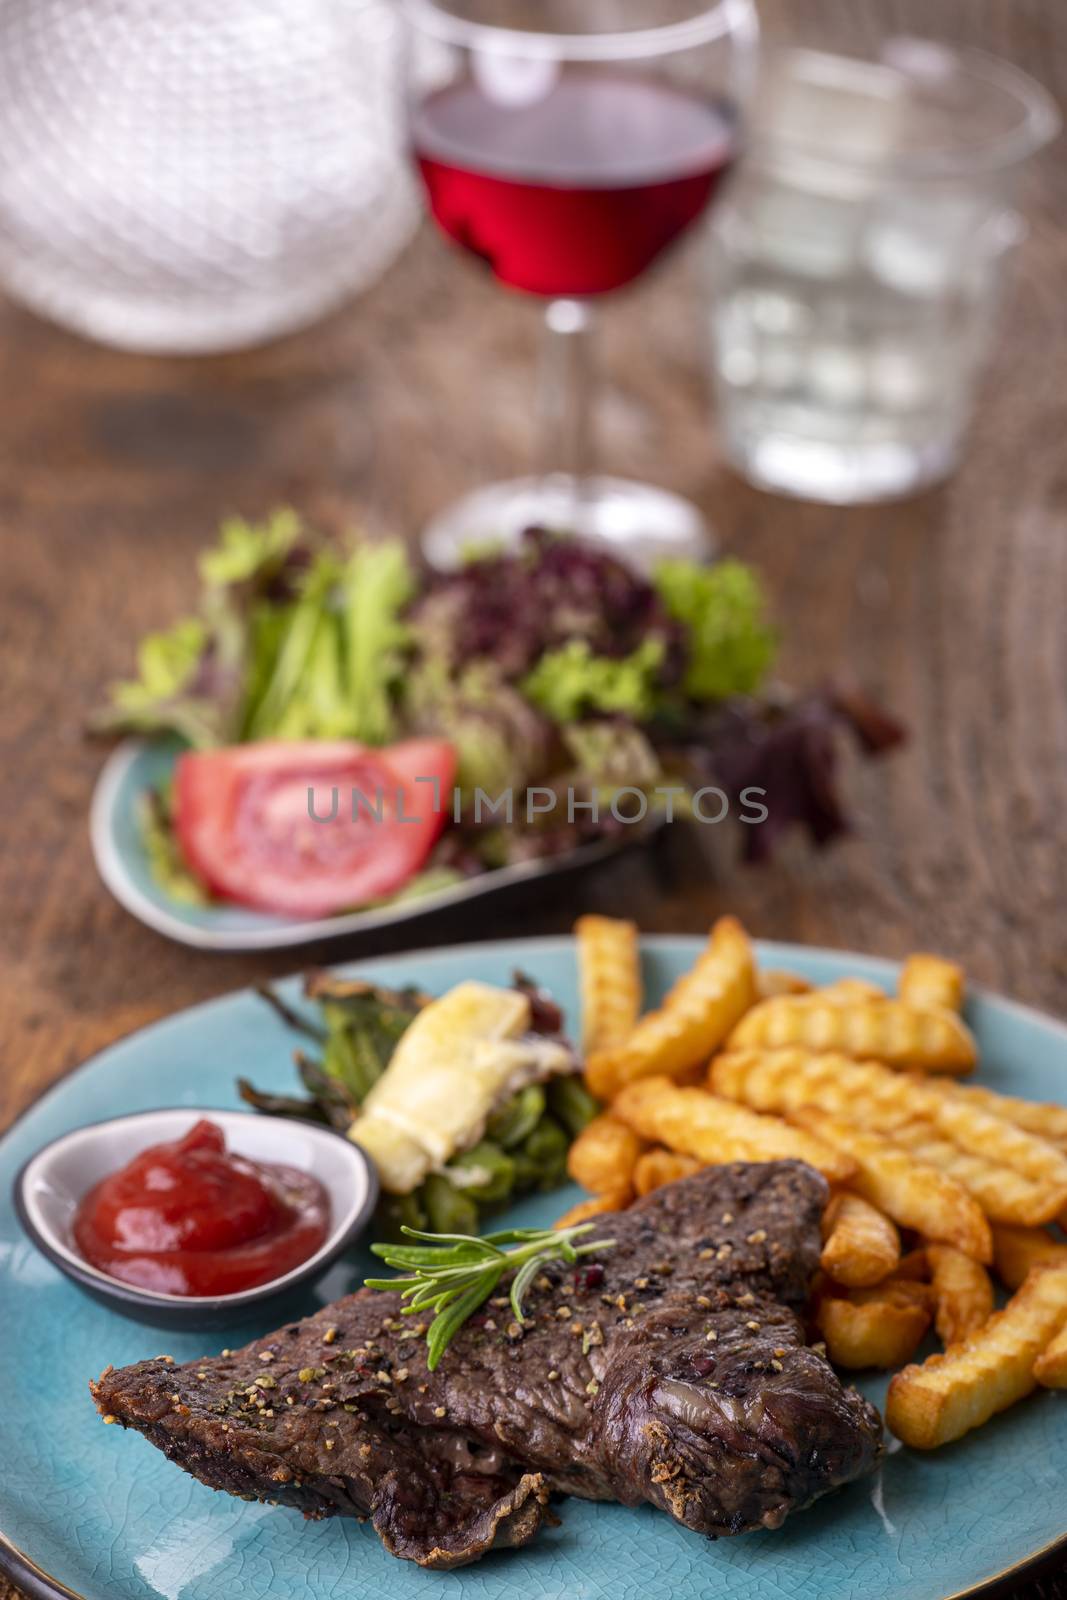 rosemary on a steak with fries